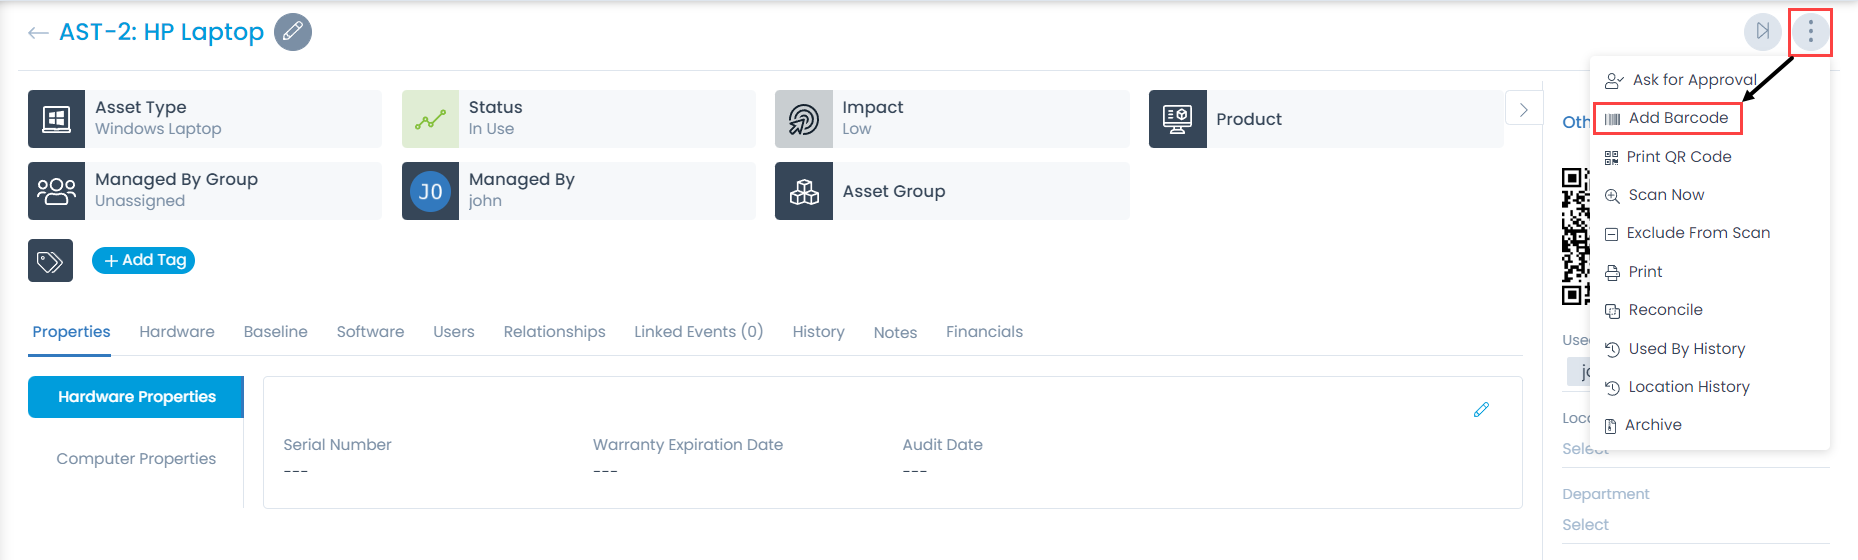 Adding Barcode from Asset Details Page